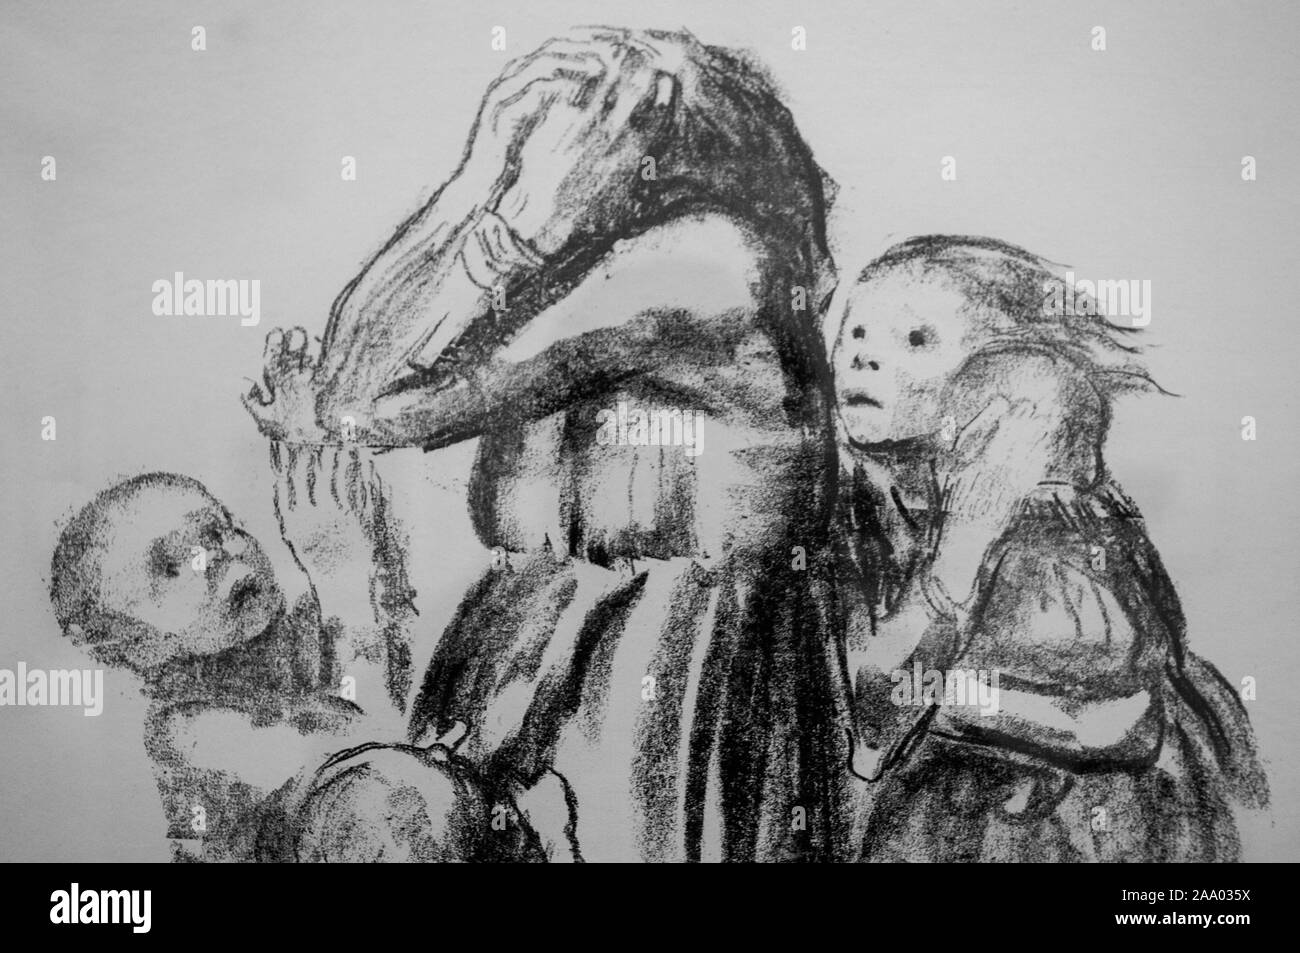 Drawings and pictures inside Käthe Kollwitz museum in Charlottenburg which features her art and sculpture, Berlin Germany Stock Photo